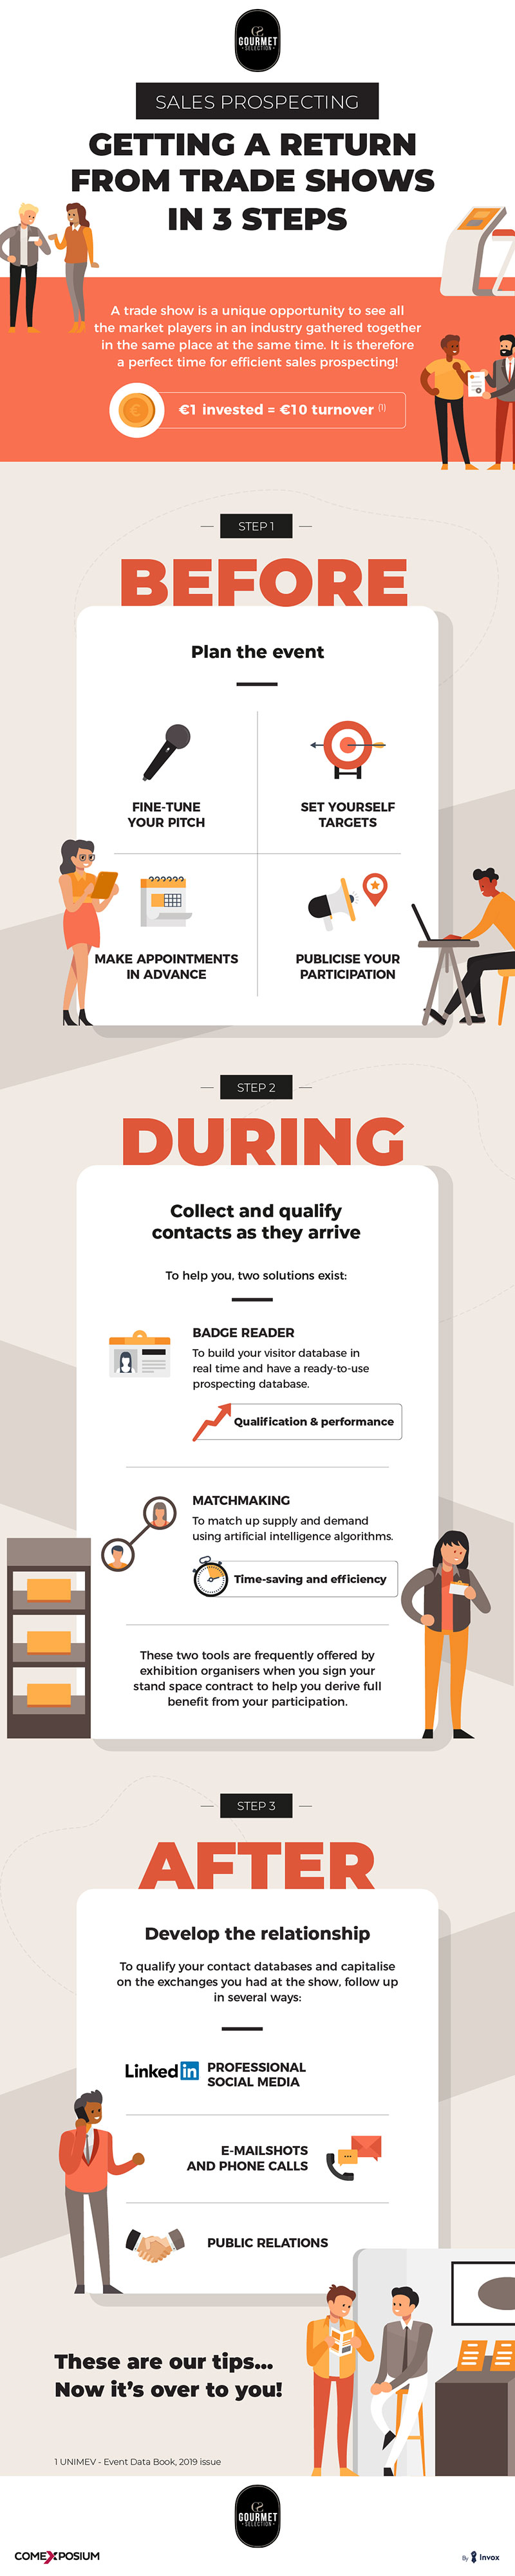 Infographic on commercial prospecting